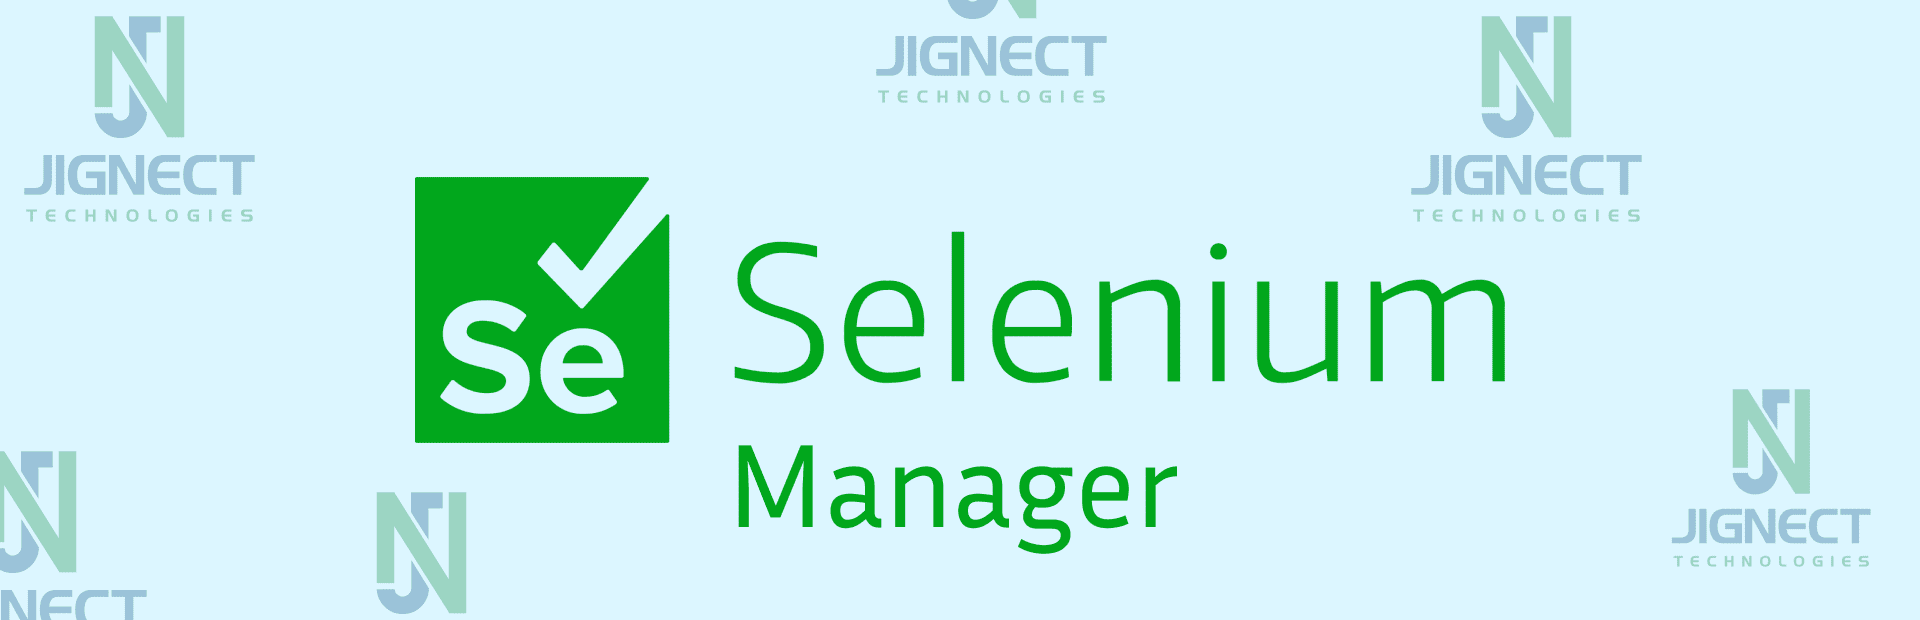 Reducing the stigma of working with Selenium | Courgette Testing Blog